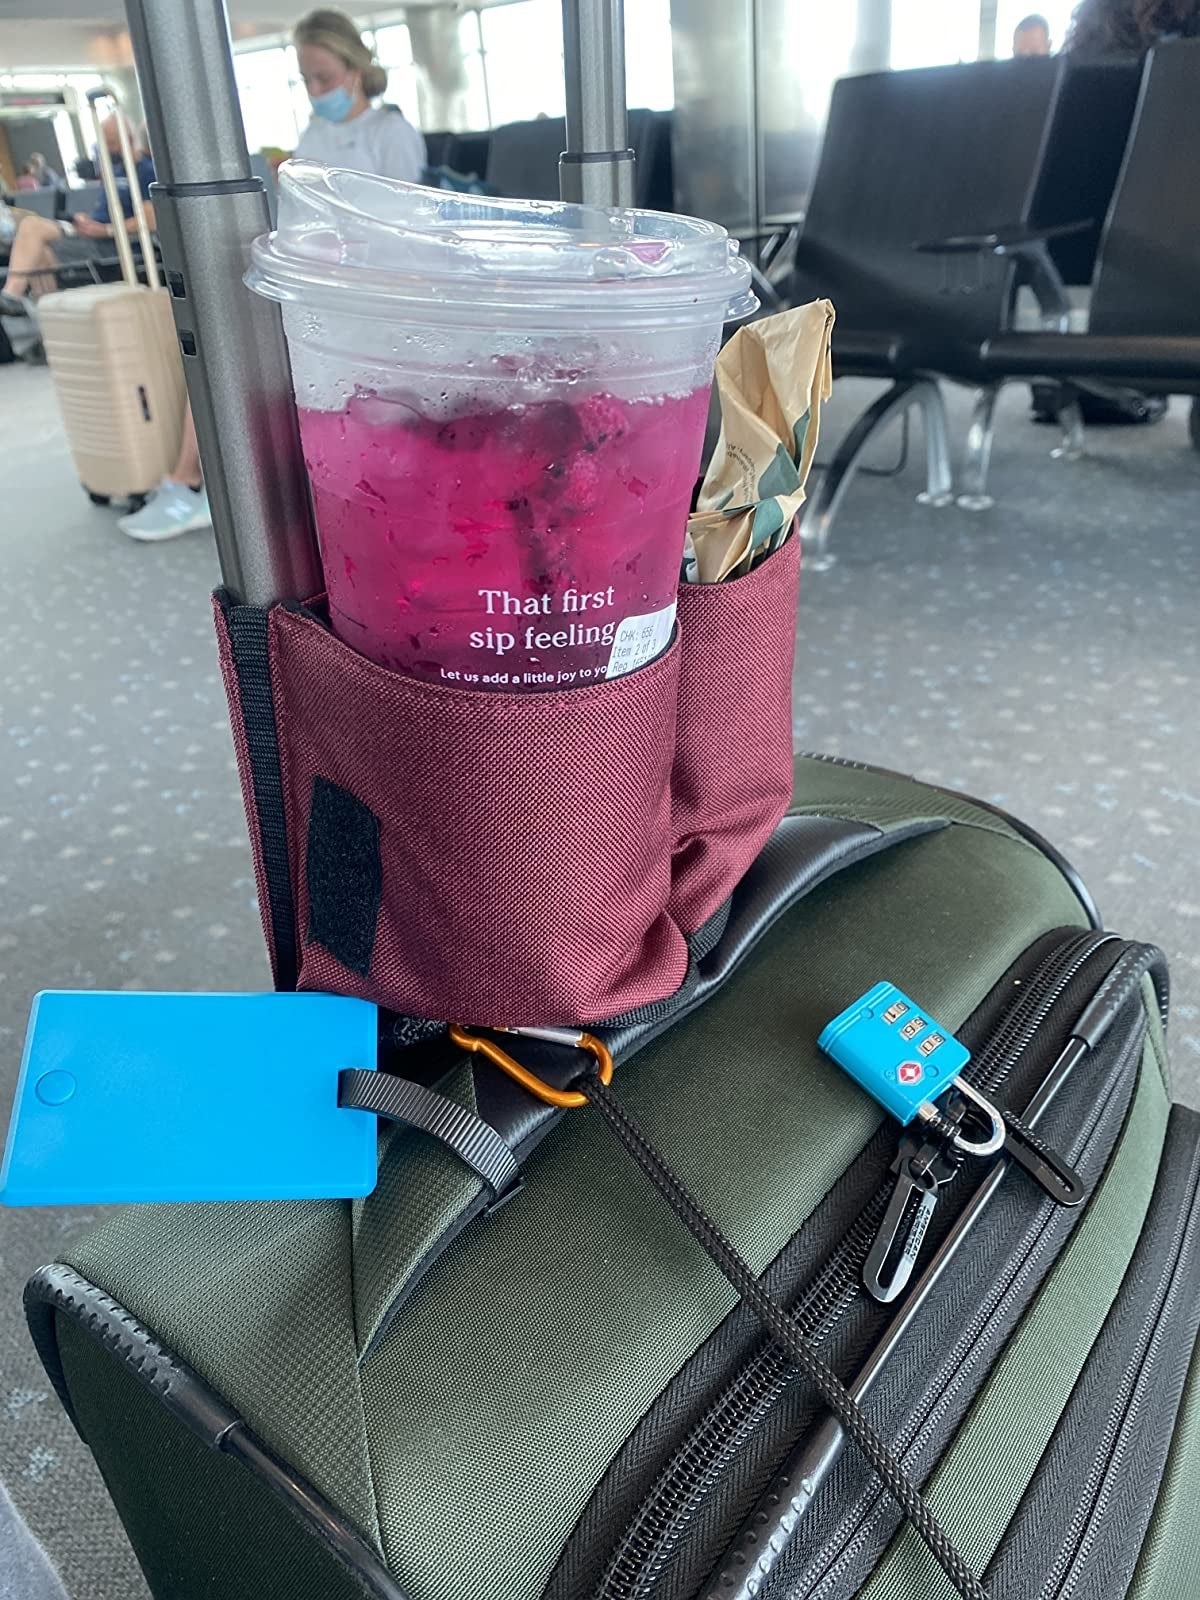 reviewer image of the cup holder attached to a suitcase with a Starbucks drink in it